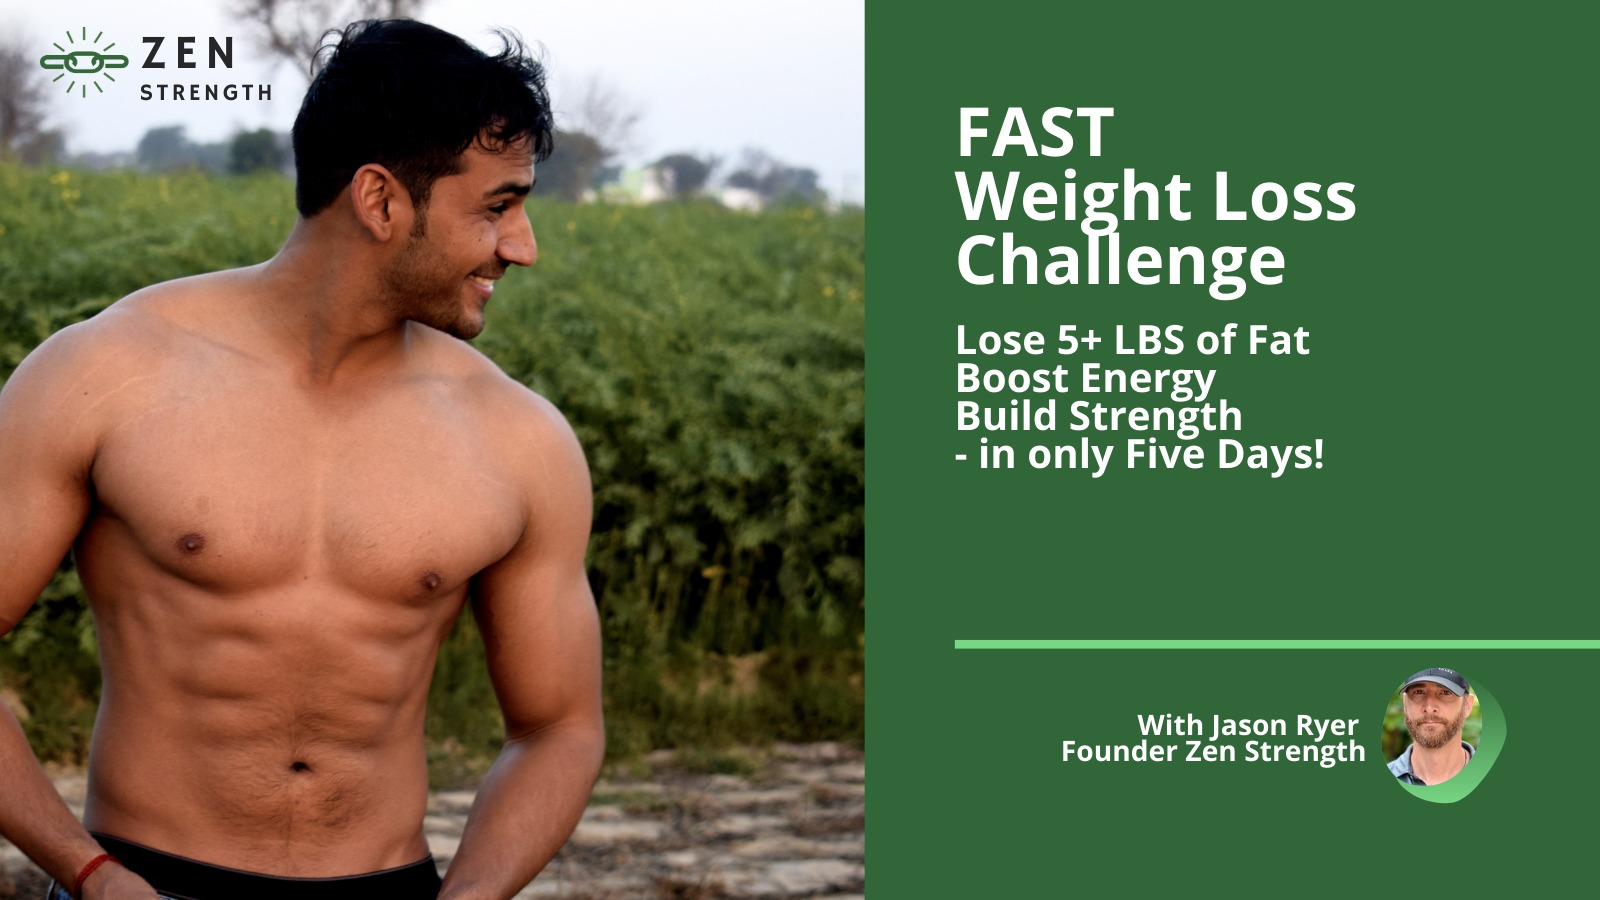 FAST Weight Loss Challenge